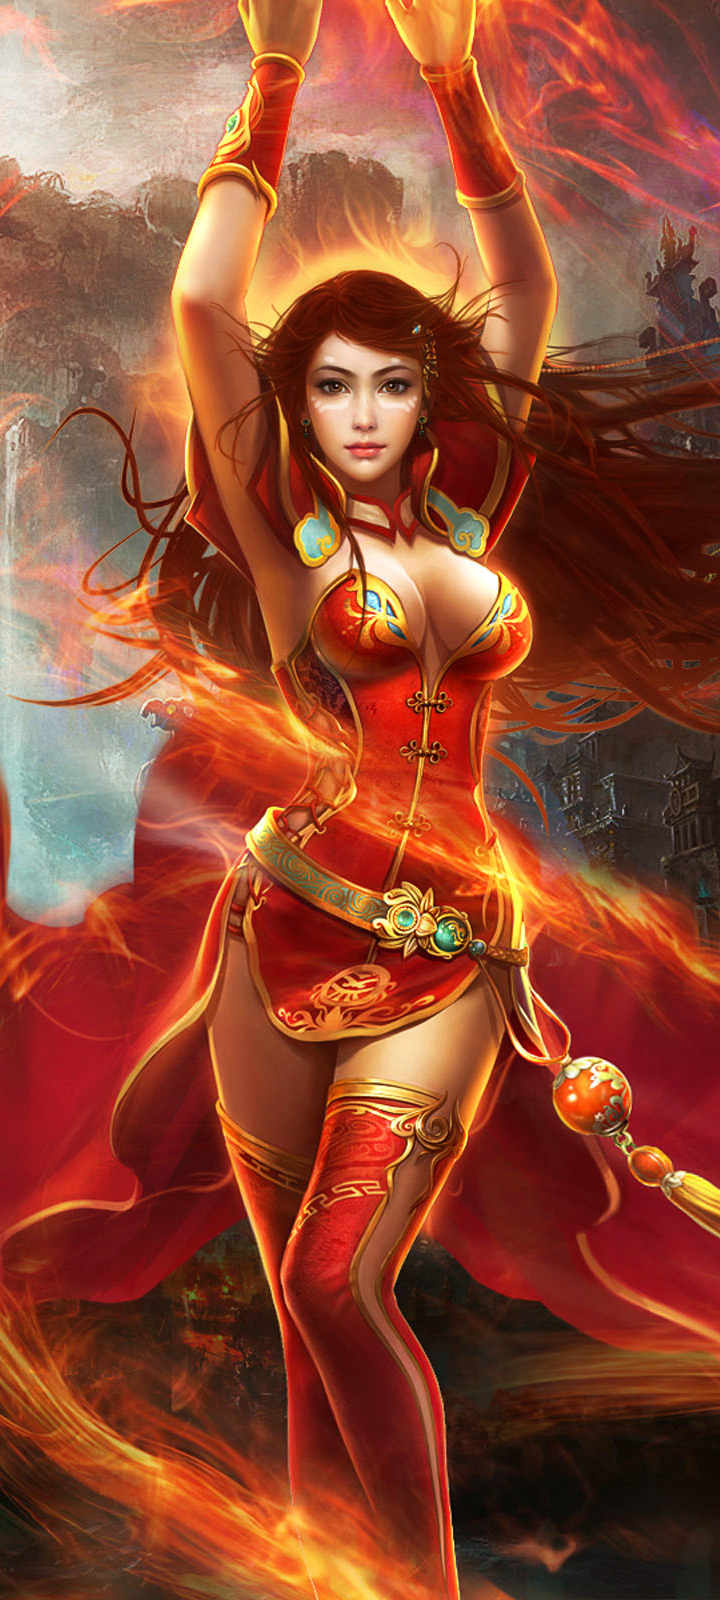 Free download Dota 2 Wallpaper Lina 27080 Hd Wallpapers in Games  Imagescicom [1920x1200] for your Desktop, Mobile & Tablet | Explore 46+ Lina  Dota 2 Wallpaper | Dota 2 Wallpapers, Dota 2 Dazzle Wallpaper, Wallpaper  Dota 2